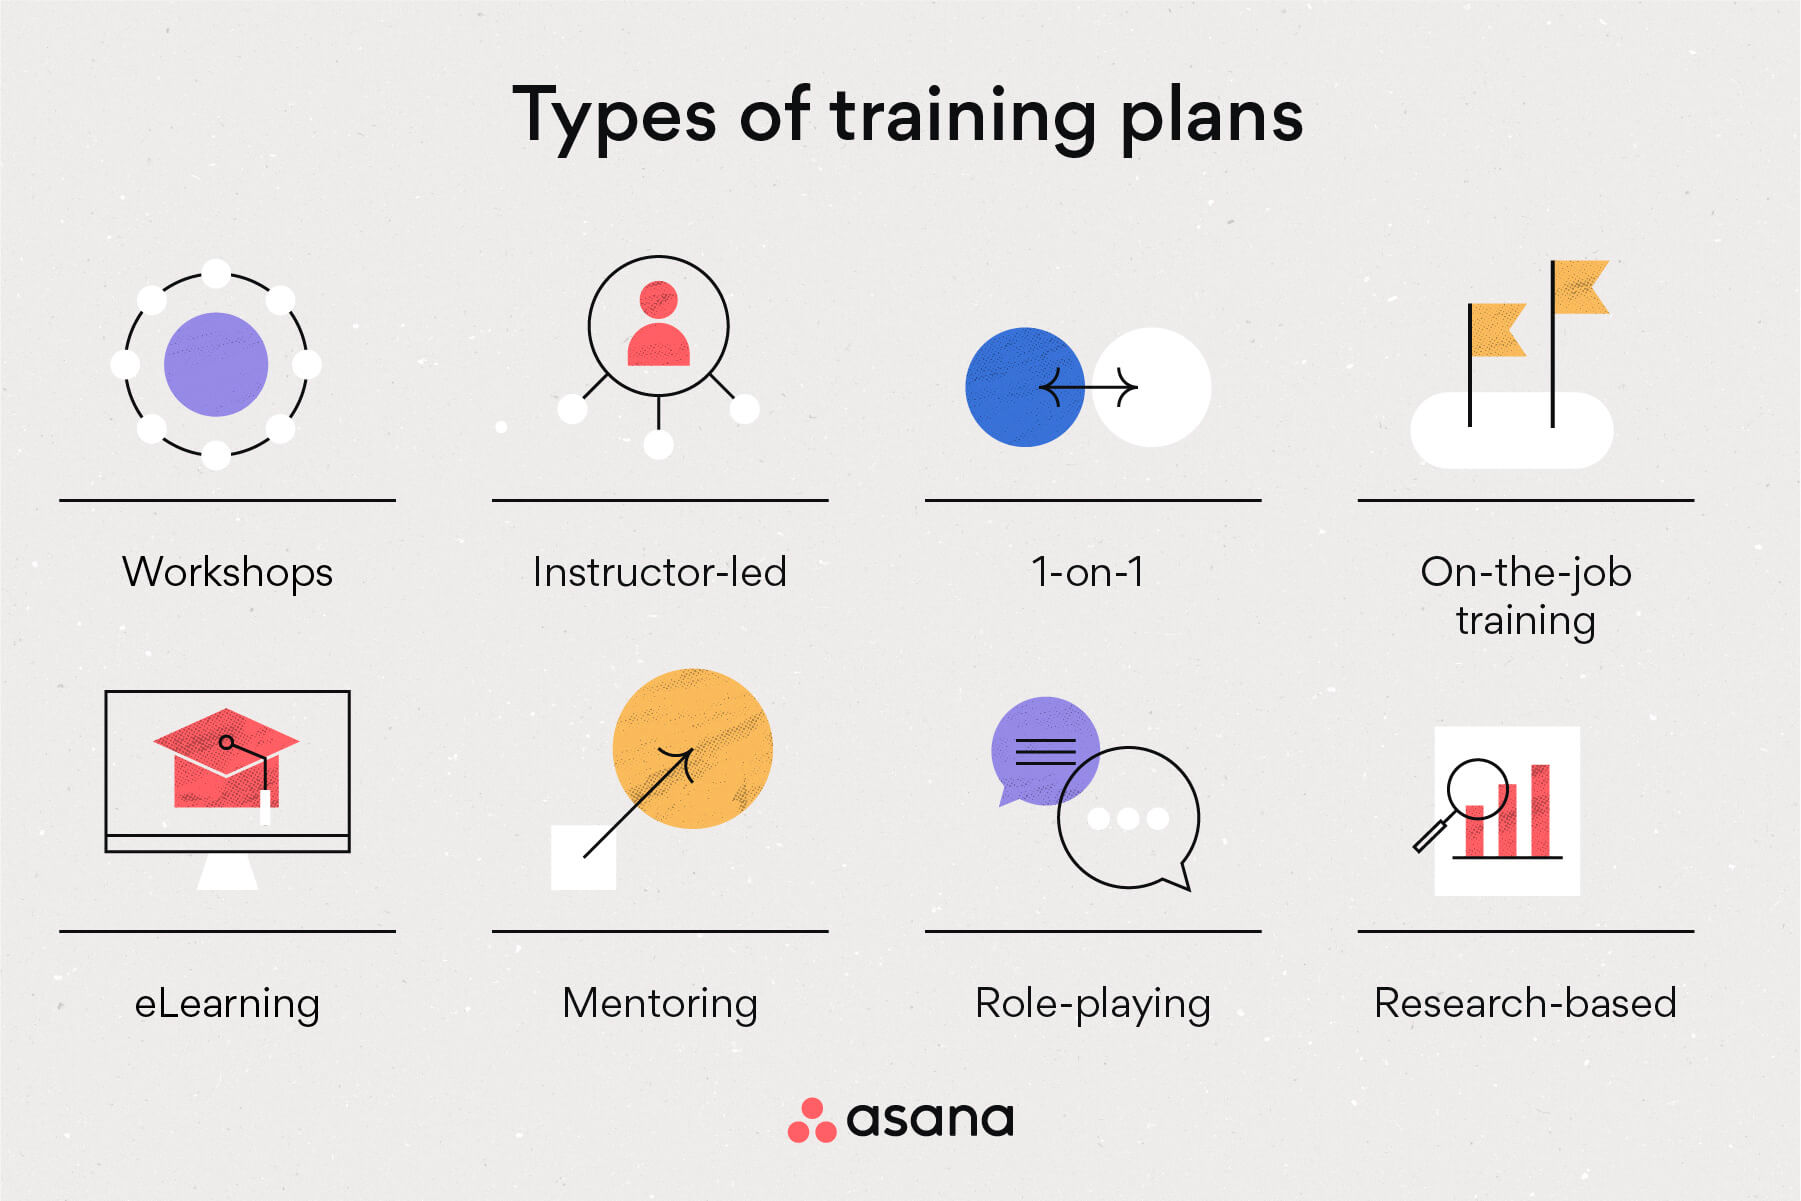 [inline illustration] Types of training plans (infographic)